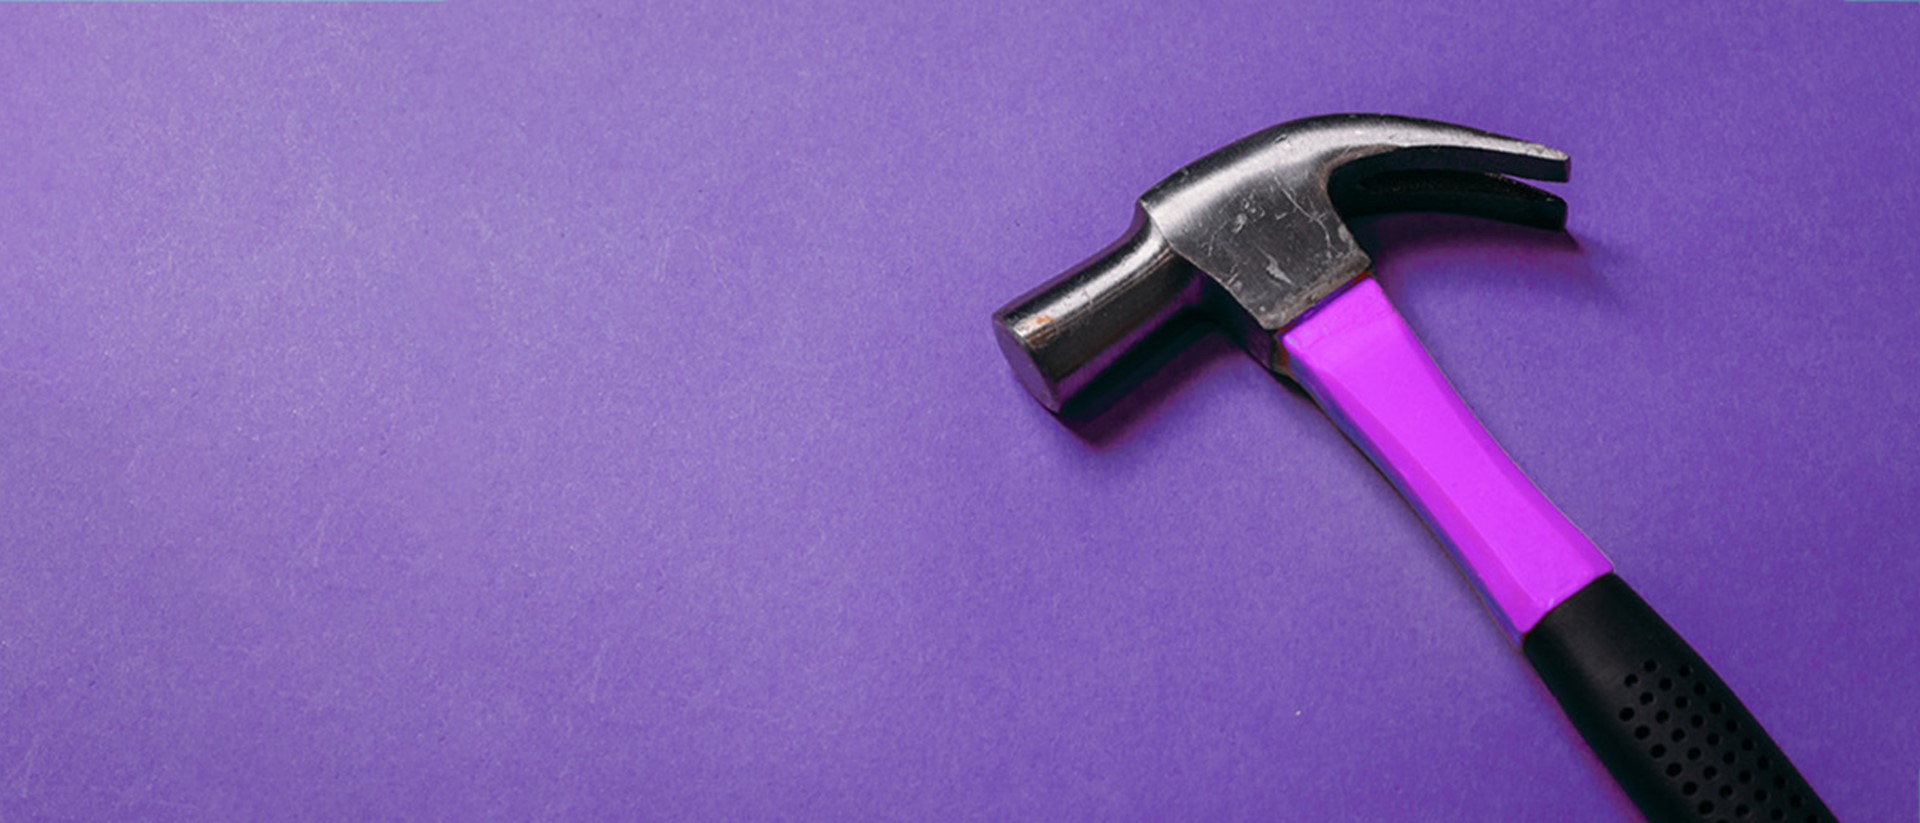 A purple hammer against a purple background